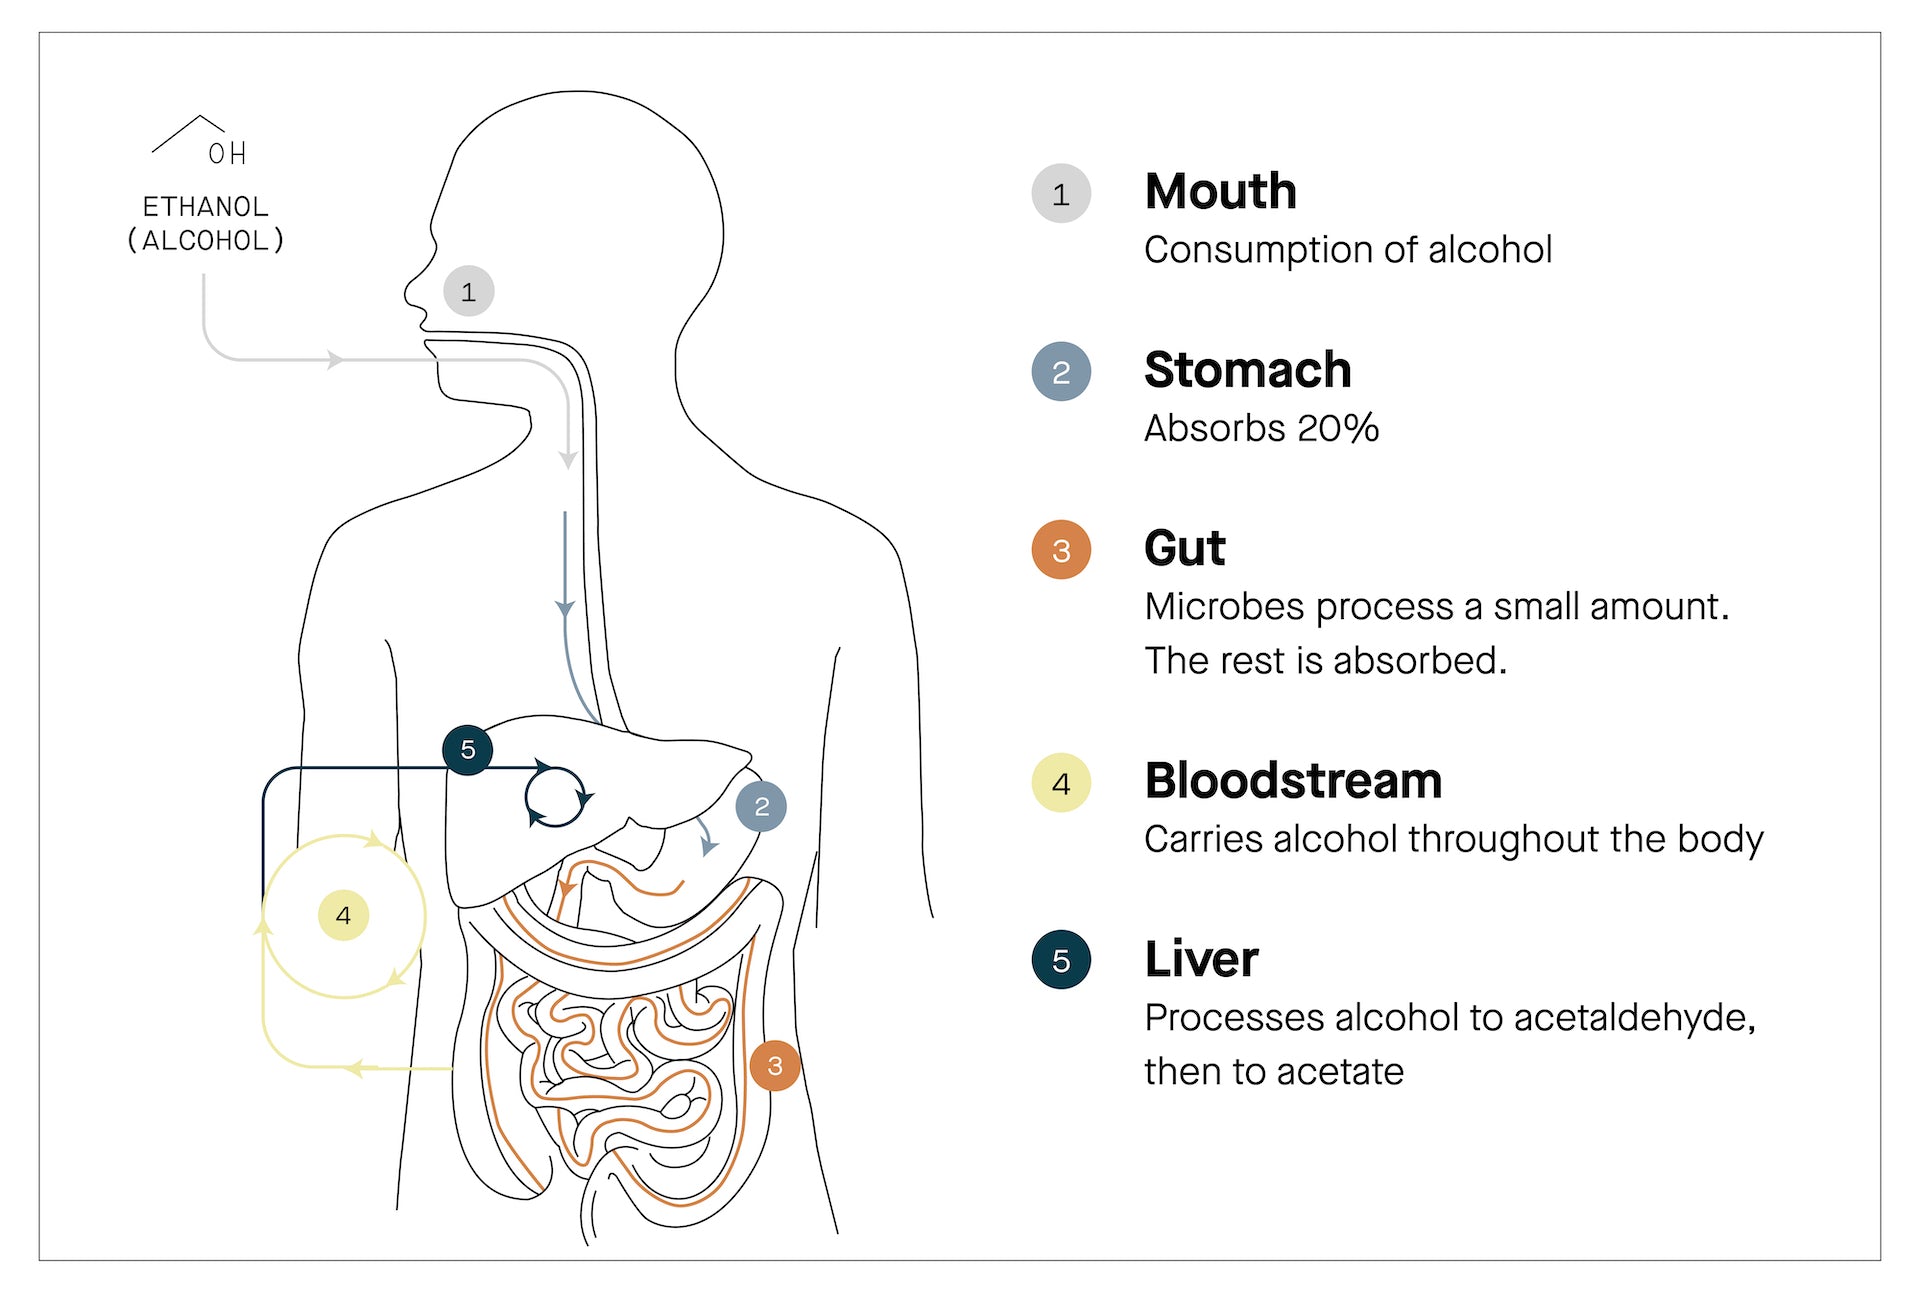 Illustration of how the human body process alcohol by mouth, stomach, gut, bloodstream, and liver